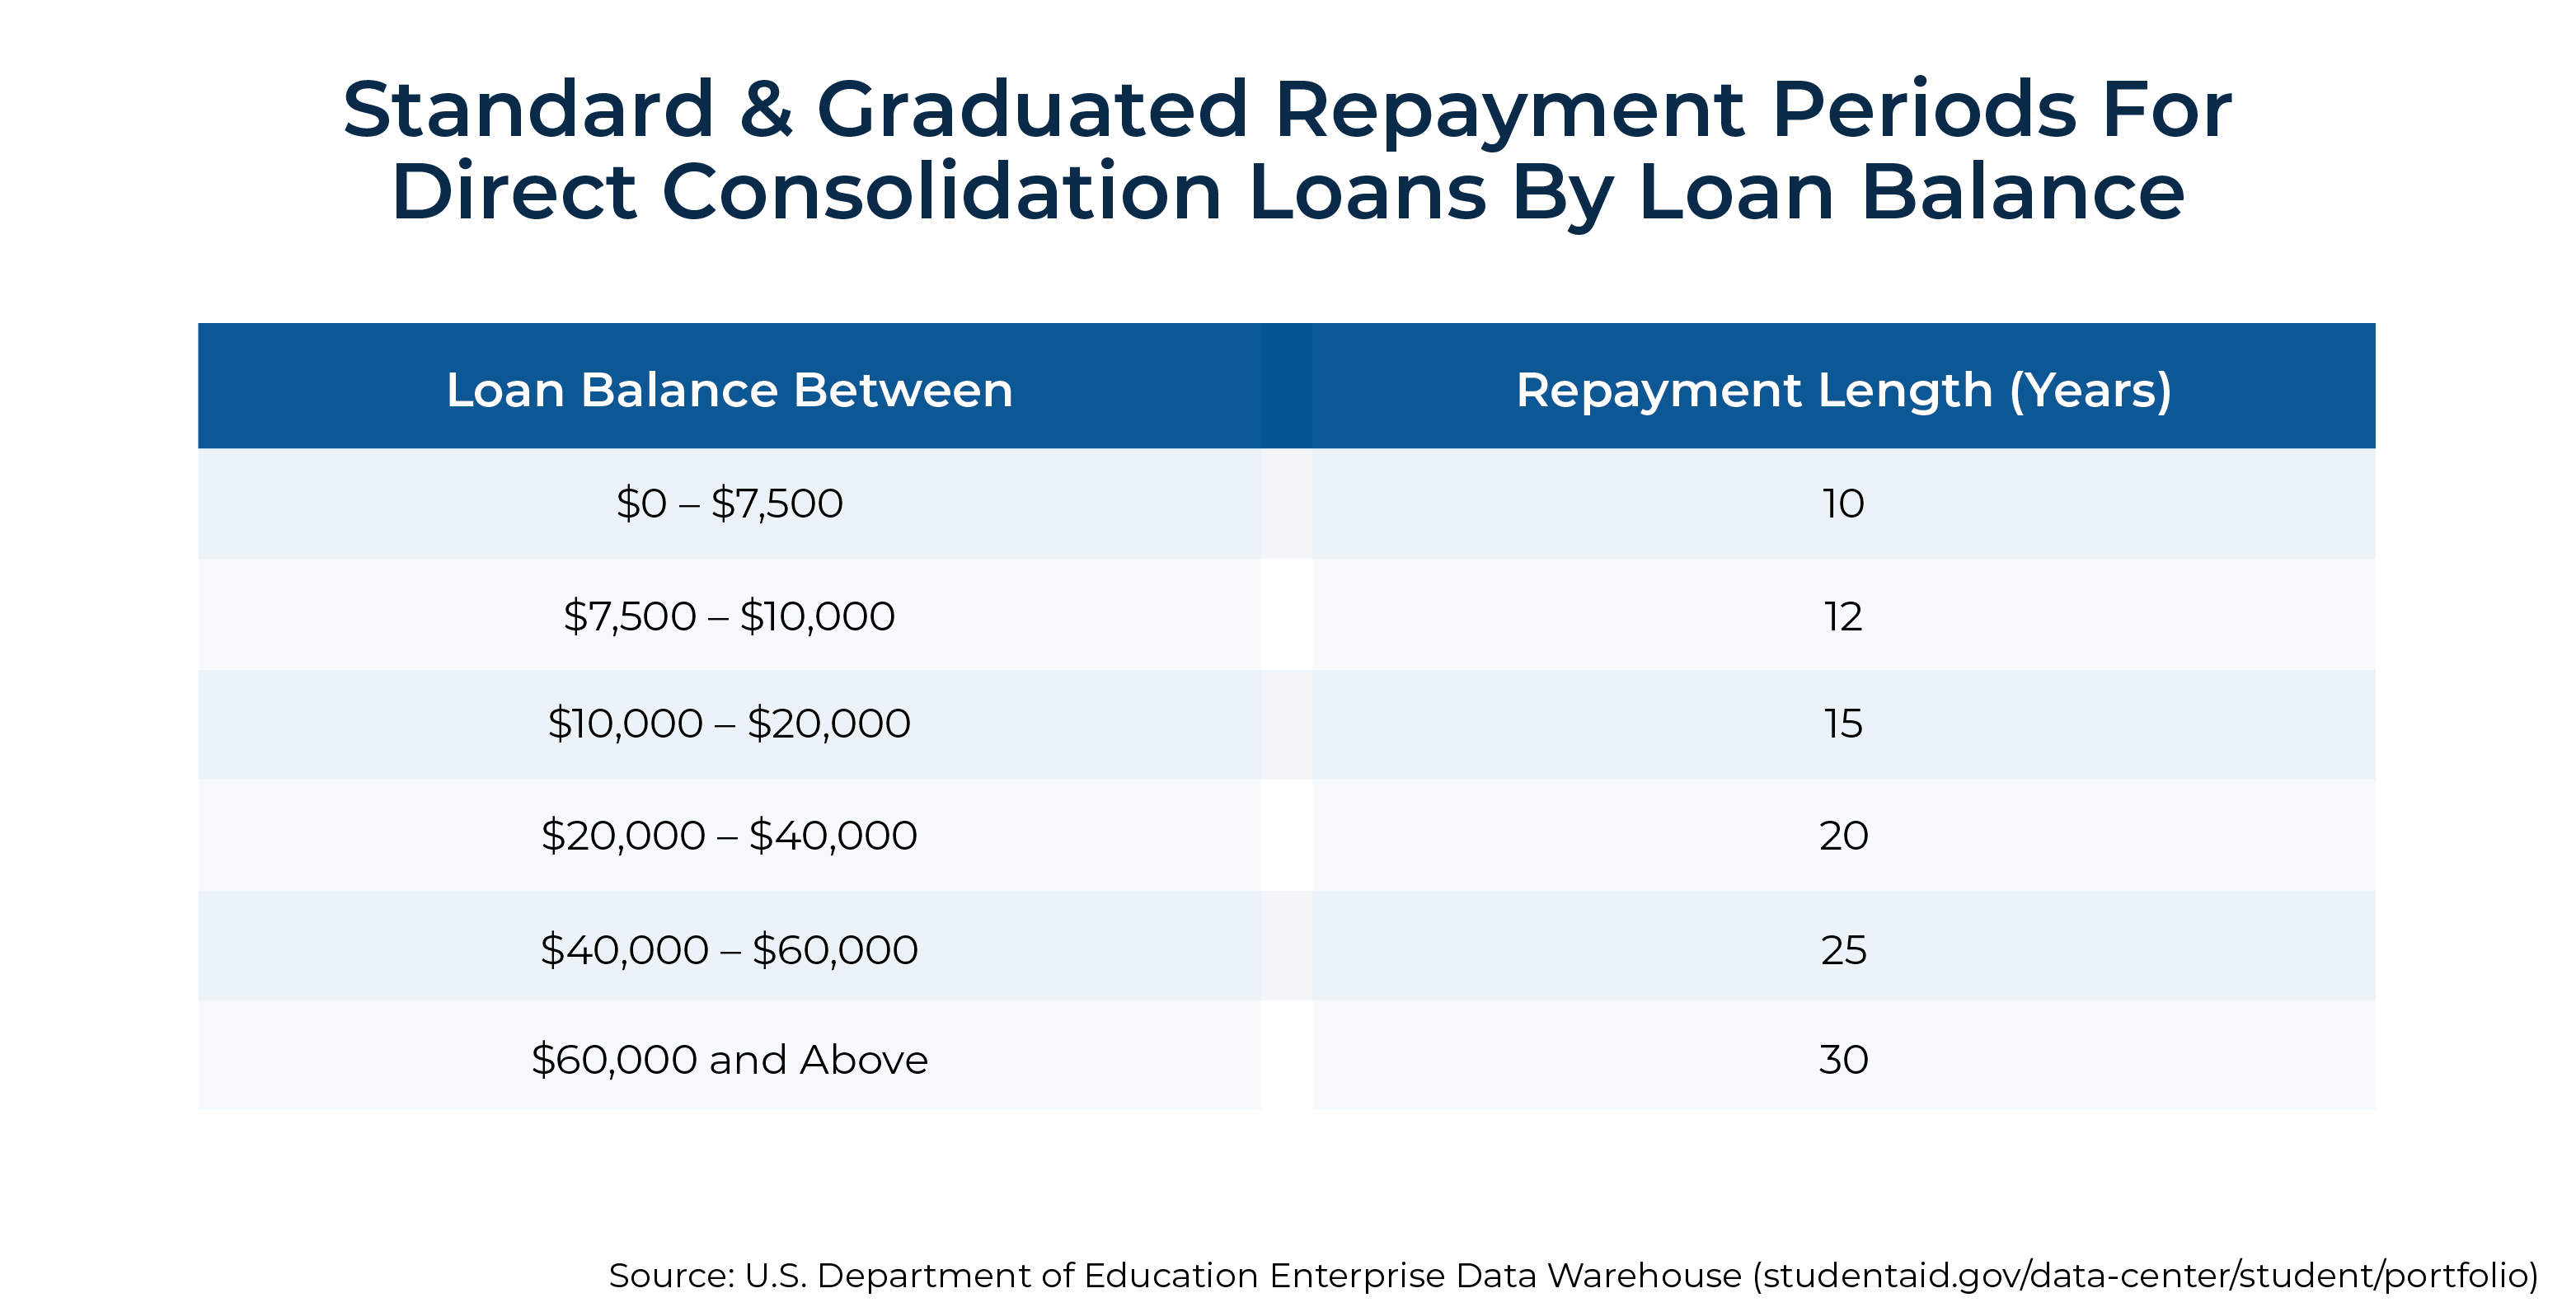 Standard Graduated Repayment Periods For Direct Consolidation Loans By Loan Balance